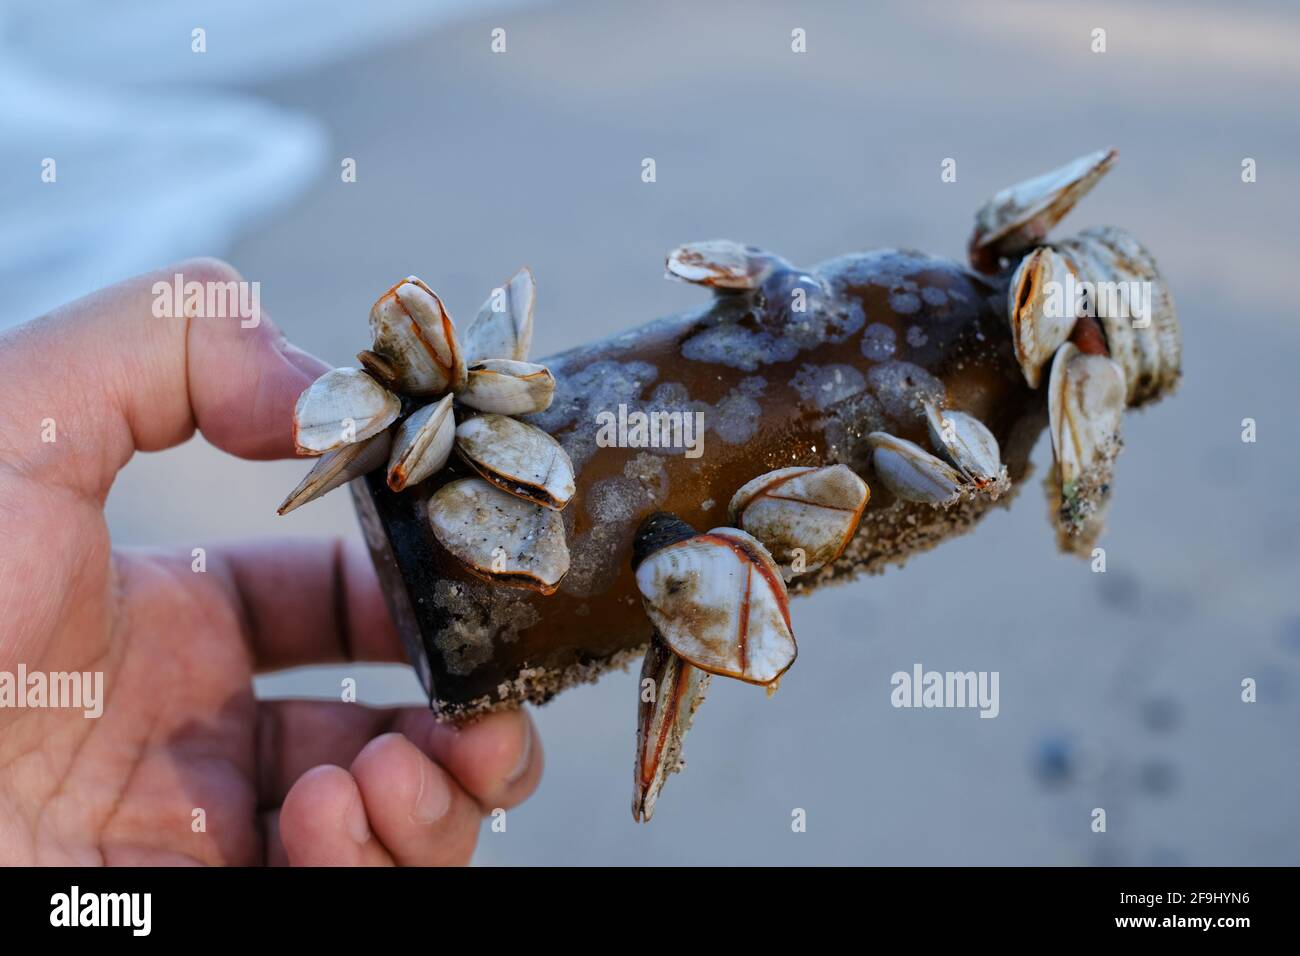 A hand picking up a thrown away glass bottle full of barnacles at a beach, cleaning up the trash to save the environment. Stock Photo